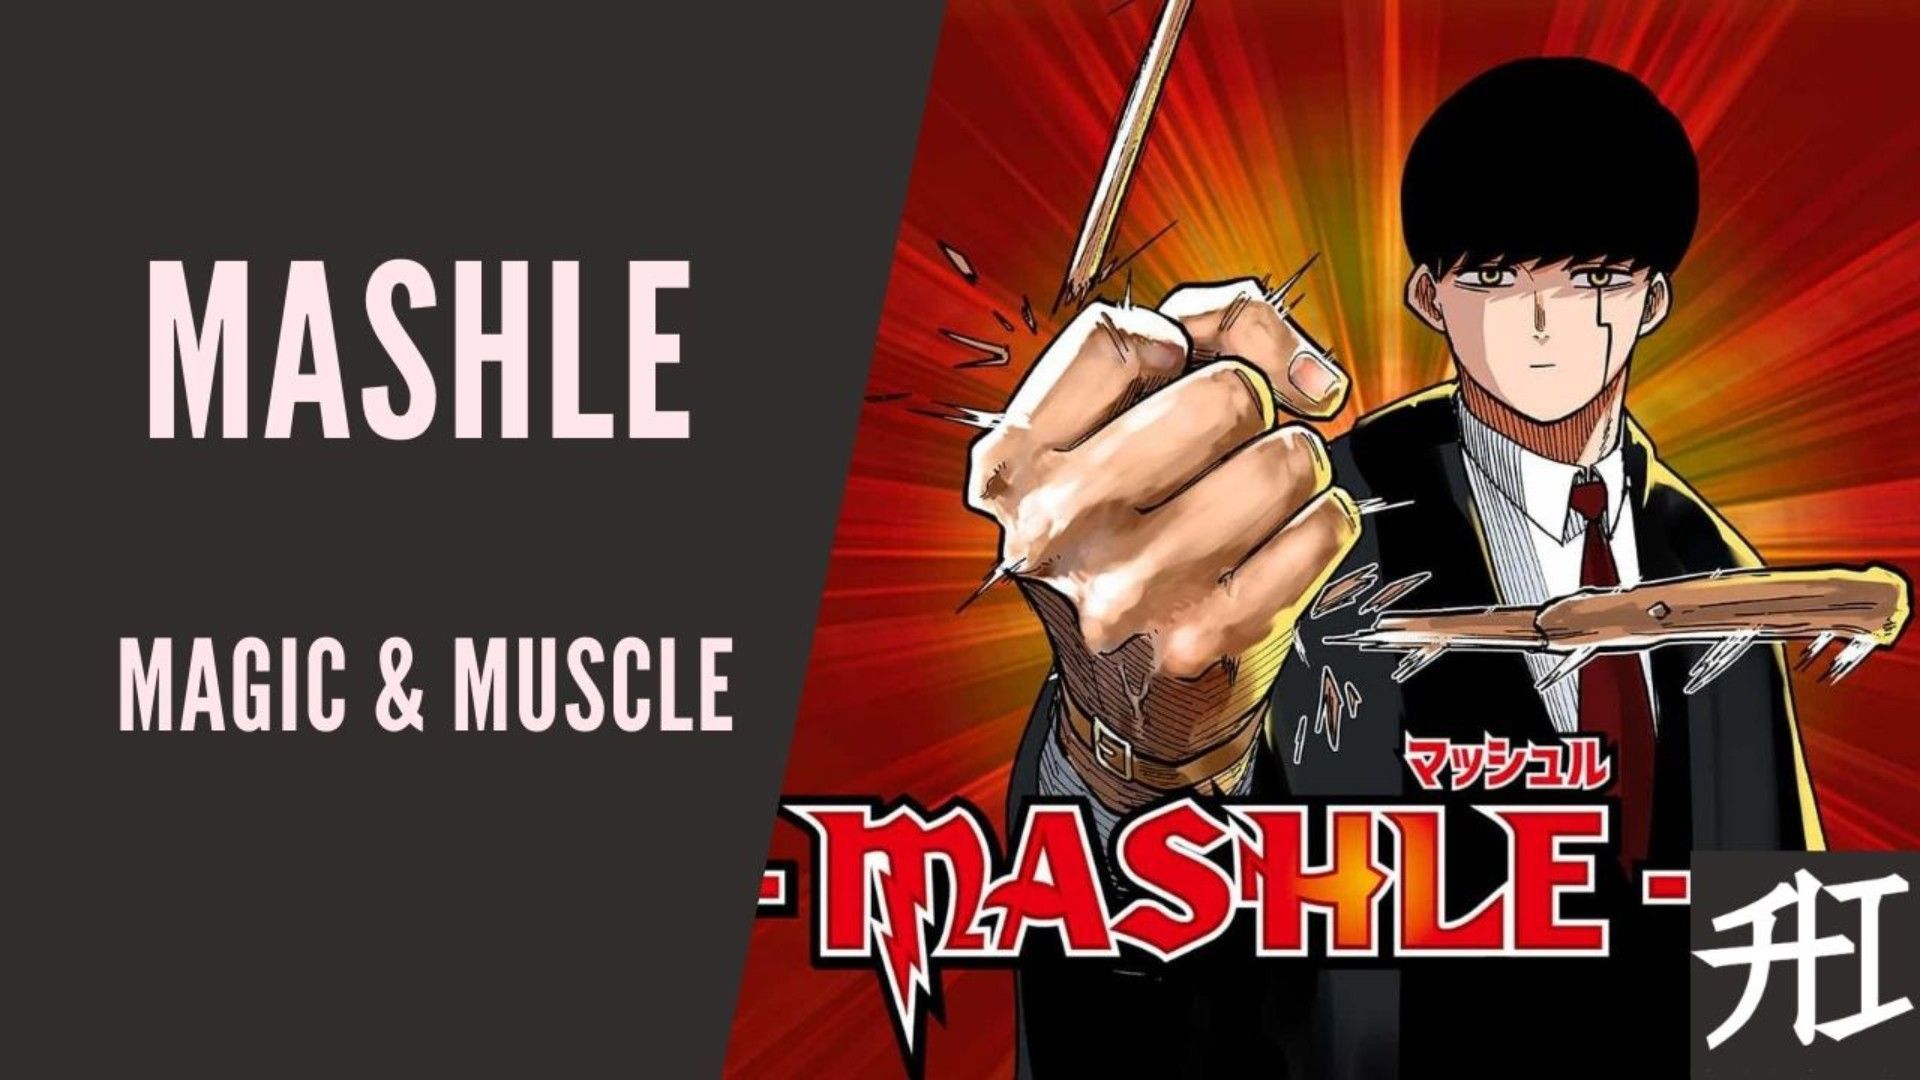 Assistir Mashle: Magic and Muscles Episodio 7 Online